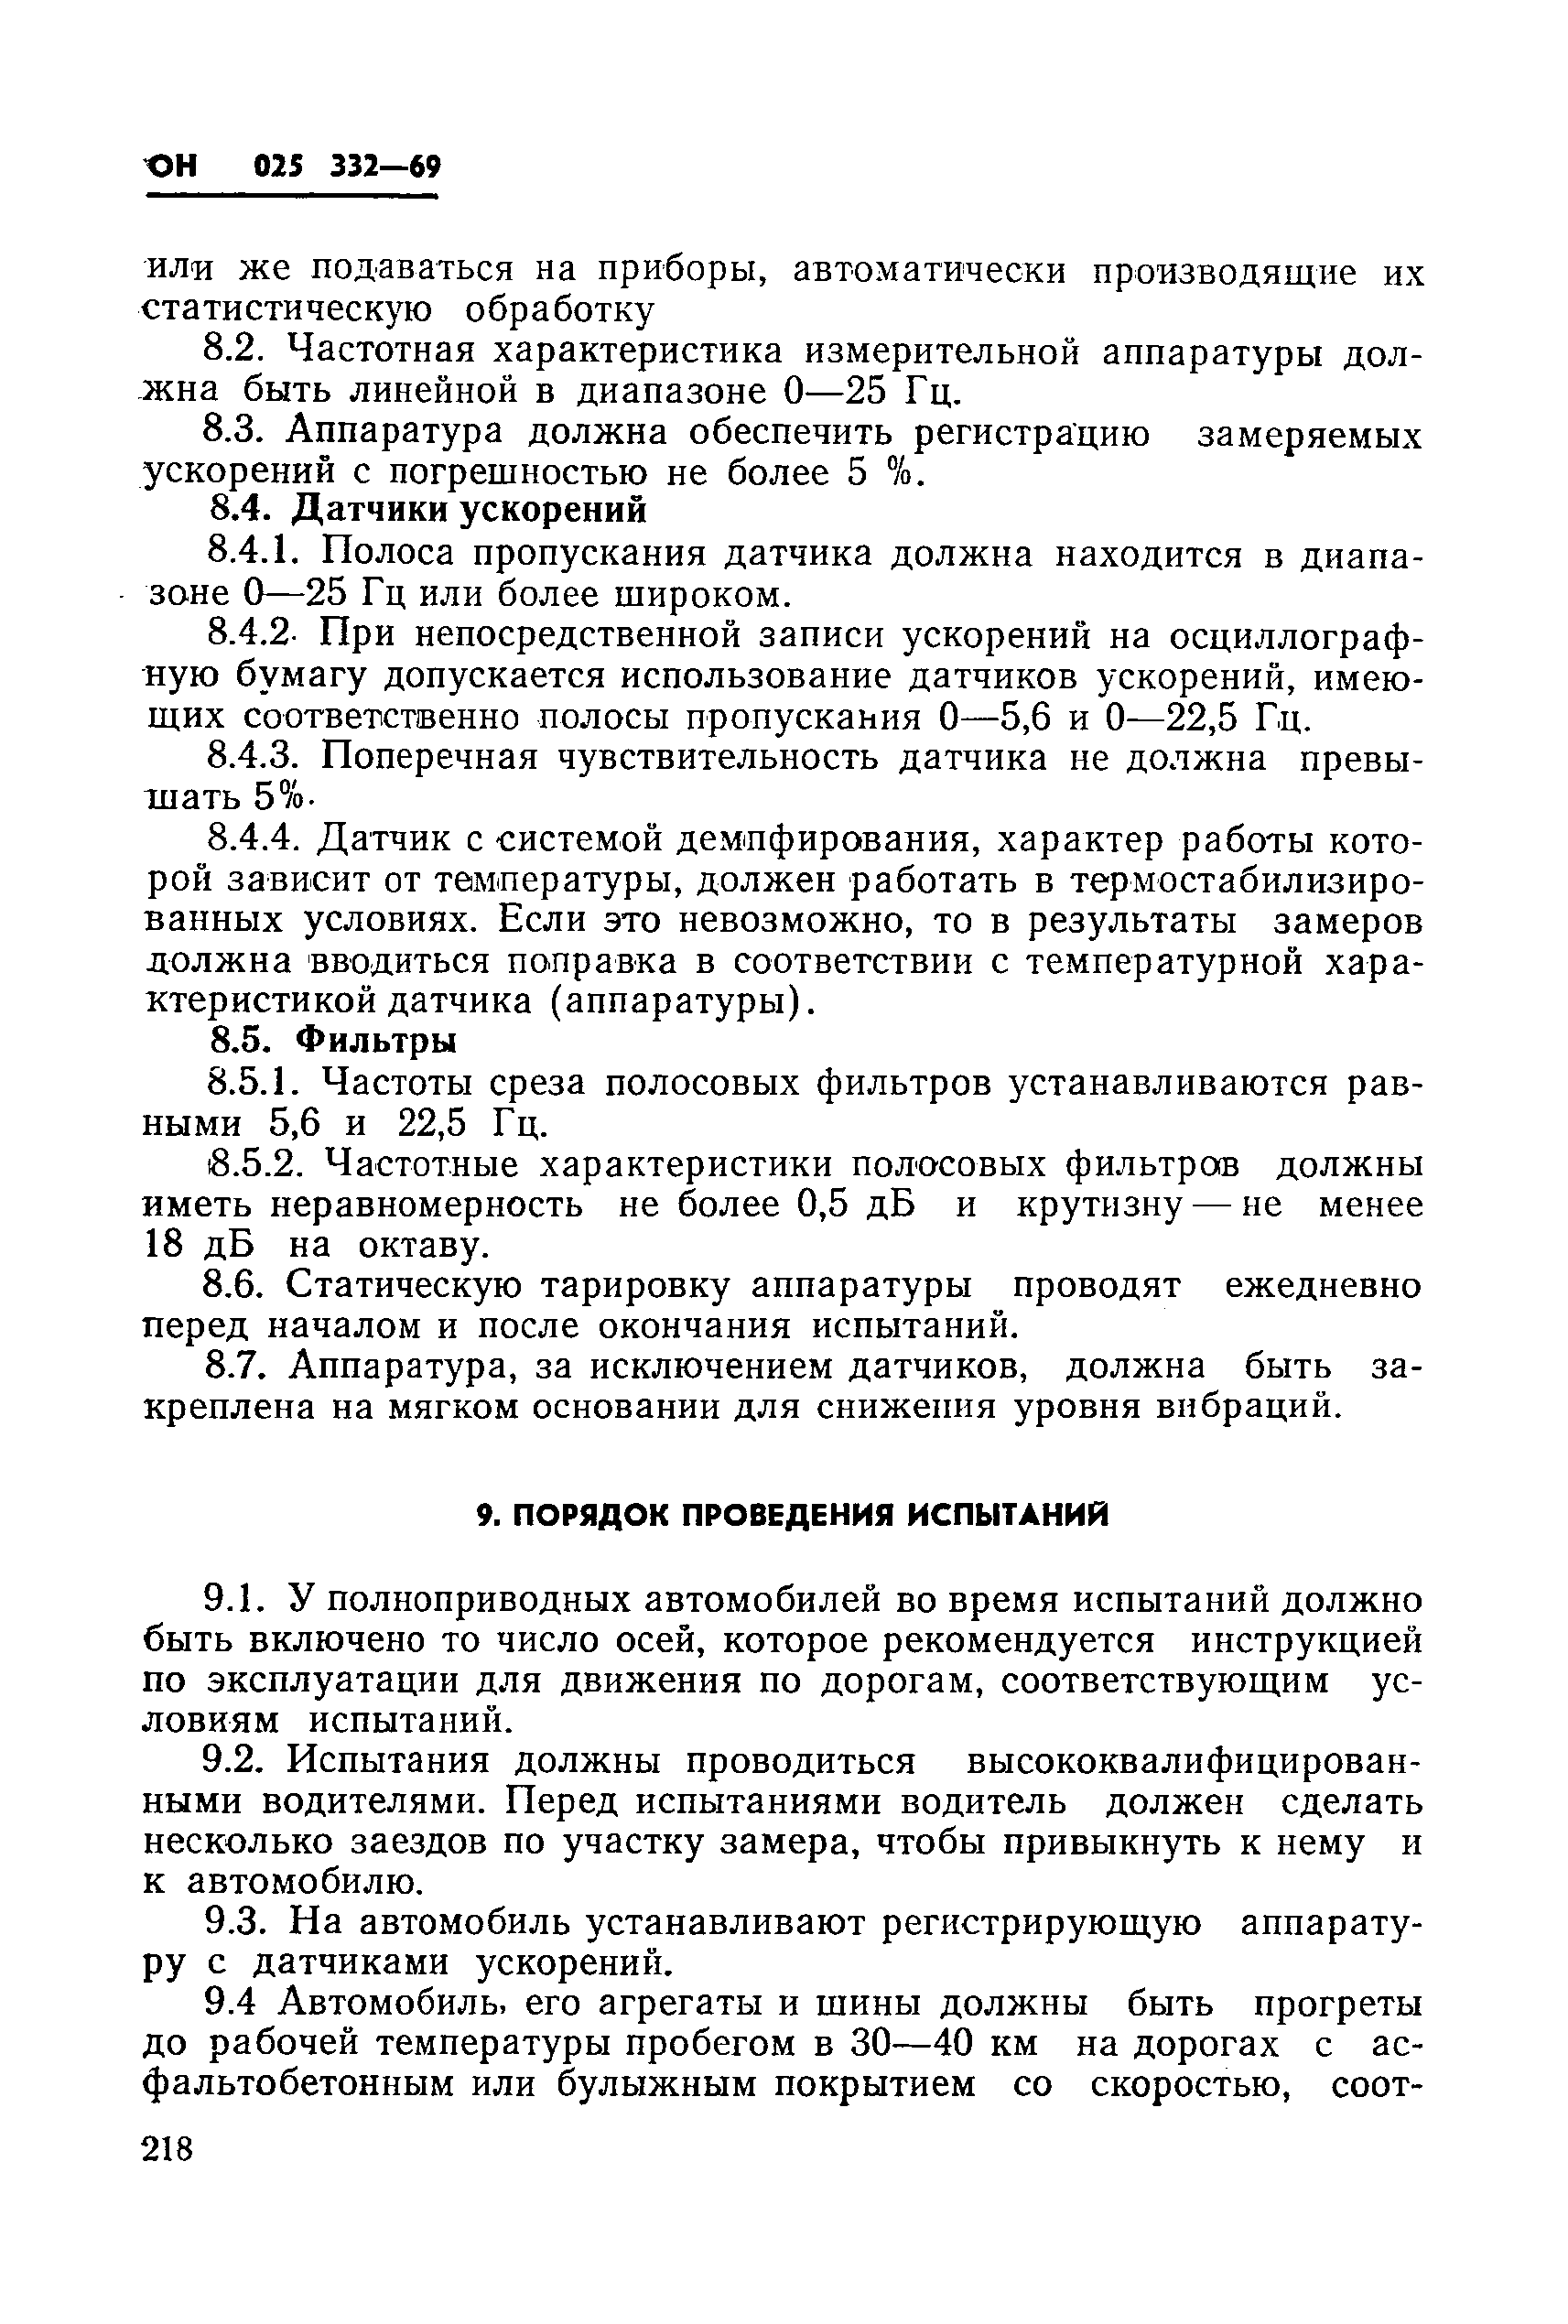 ОН 025 332-69